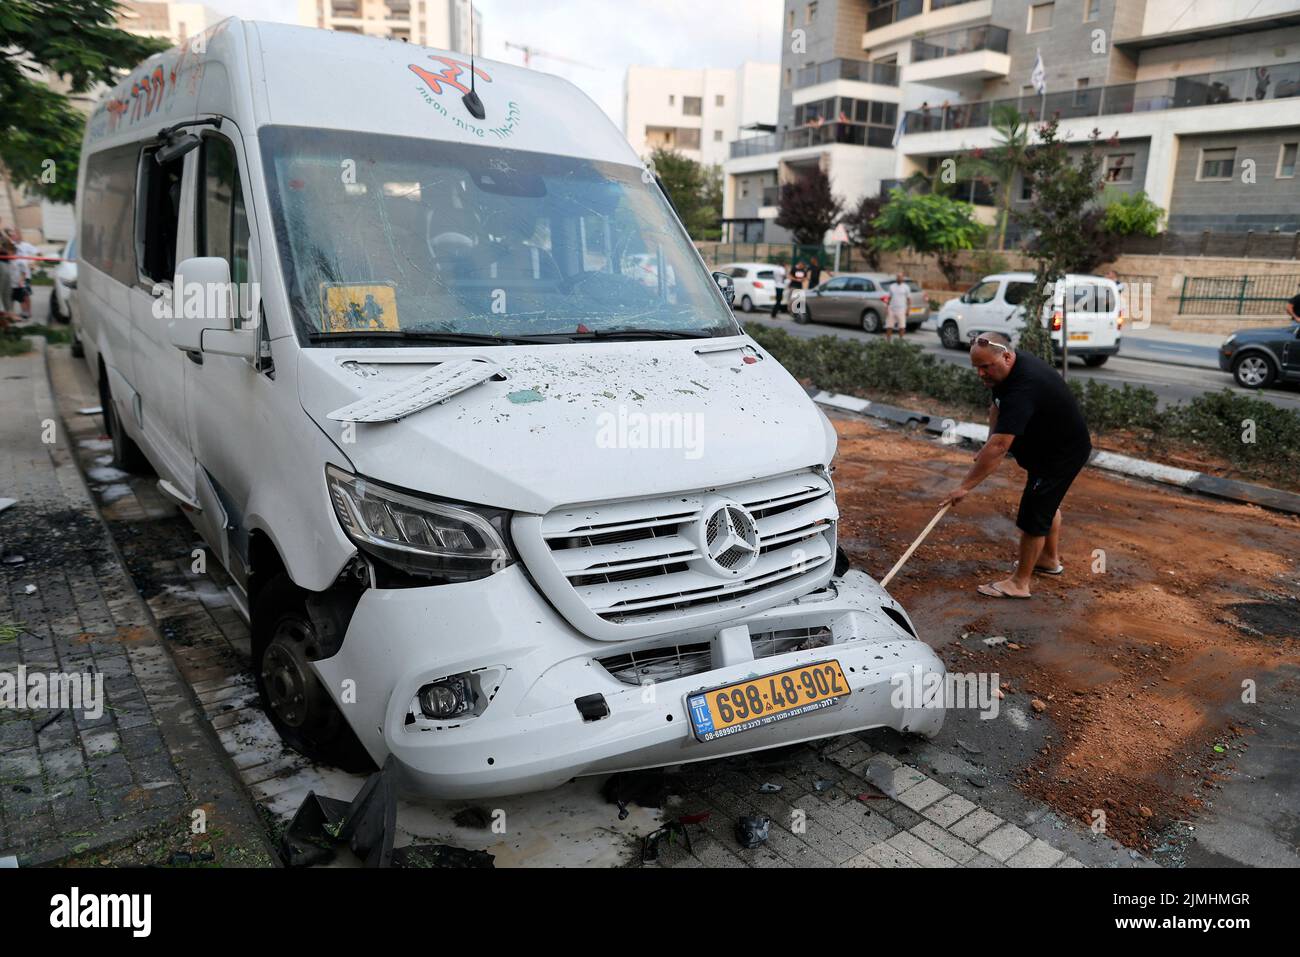 (220806) -- ASHKELON (ISRAEL), Aug. 6, 2022 (Xinhua) -- A man clears an area hit by a rocket fired from Gaza in the southern Israeli city of Ashkelon, on Aug. 6, 2022. The Israeli military continued on Saturday its military operation against the Palestinian Islamic Jihad (PIJ), bombing dozens of targets belonging to the militant group in the Gaza Strip, while hundreds of rockets were launched from the Palestinian enclave toward Israel. (Ilan Assayag/JINI via Xinhua) Stock Photo